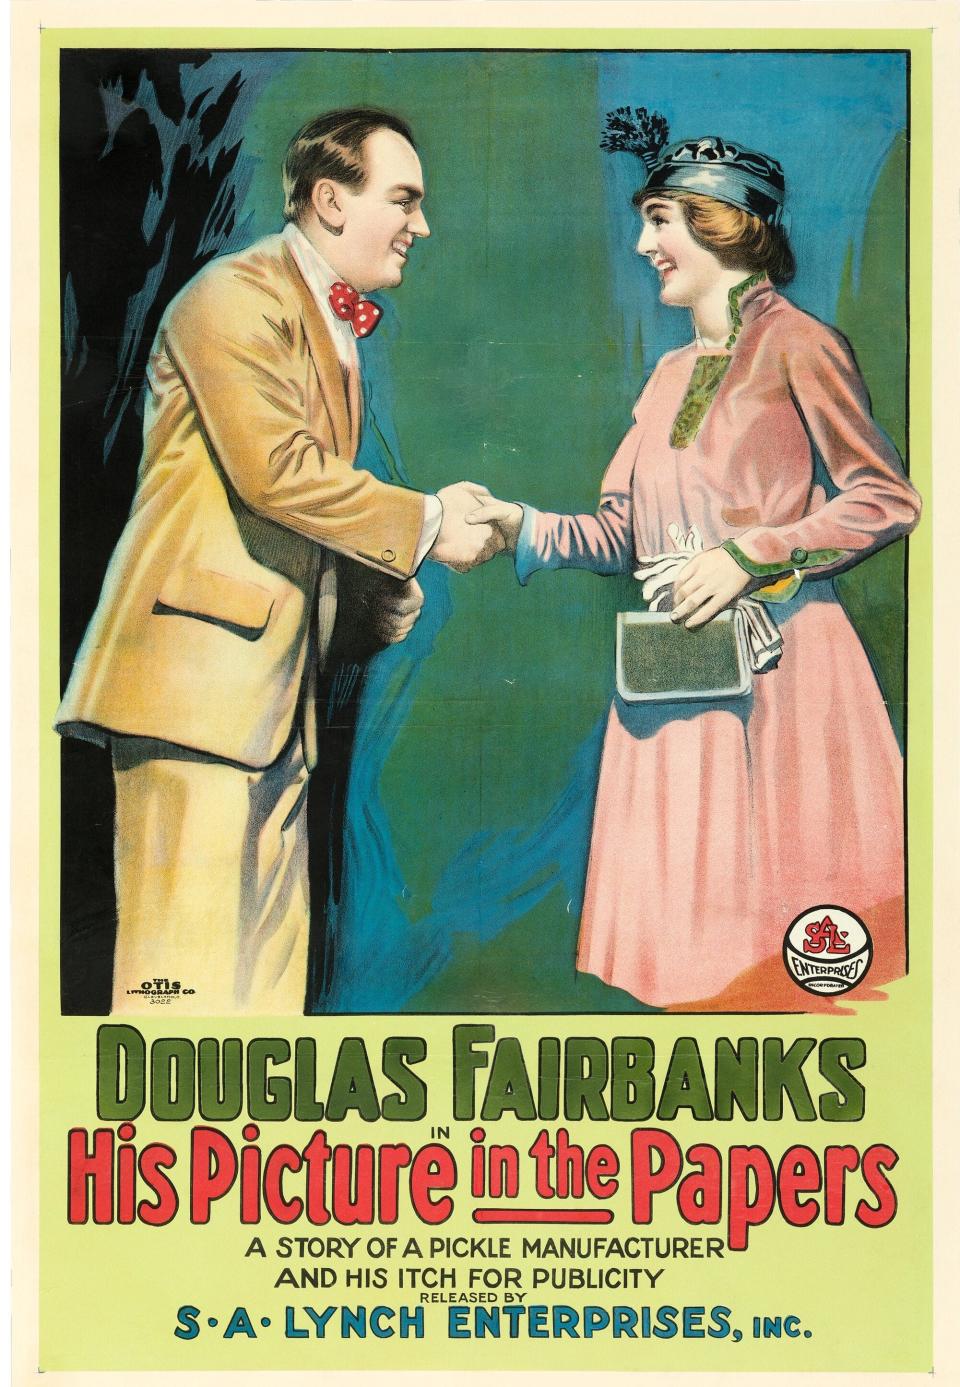 "His Picture in the Papers," a 1916 Douglas Fairbanks comedy filmed partly in Fort Lee